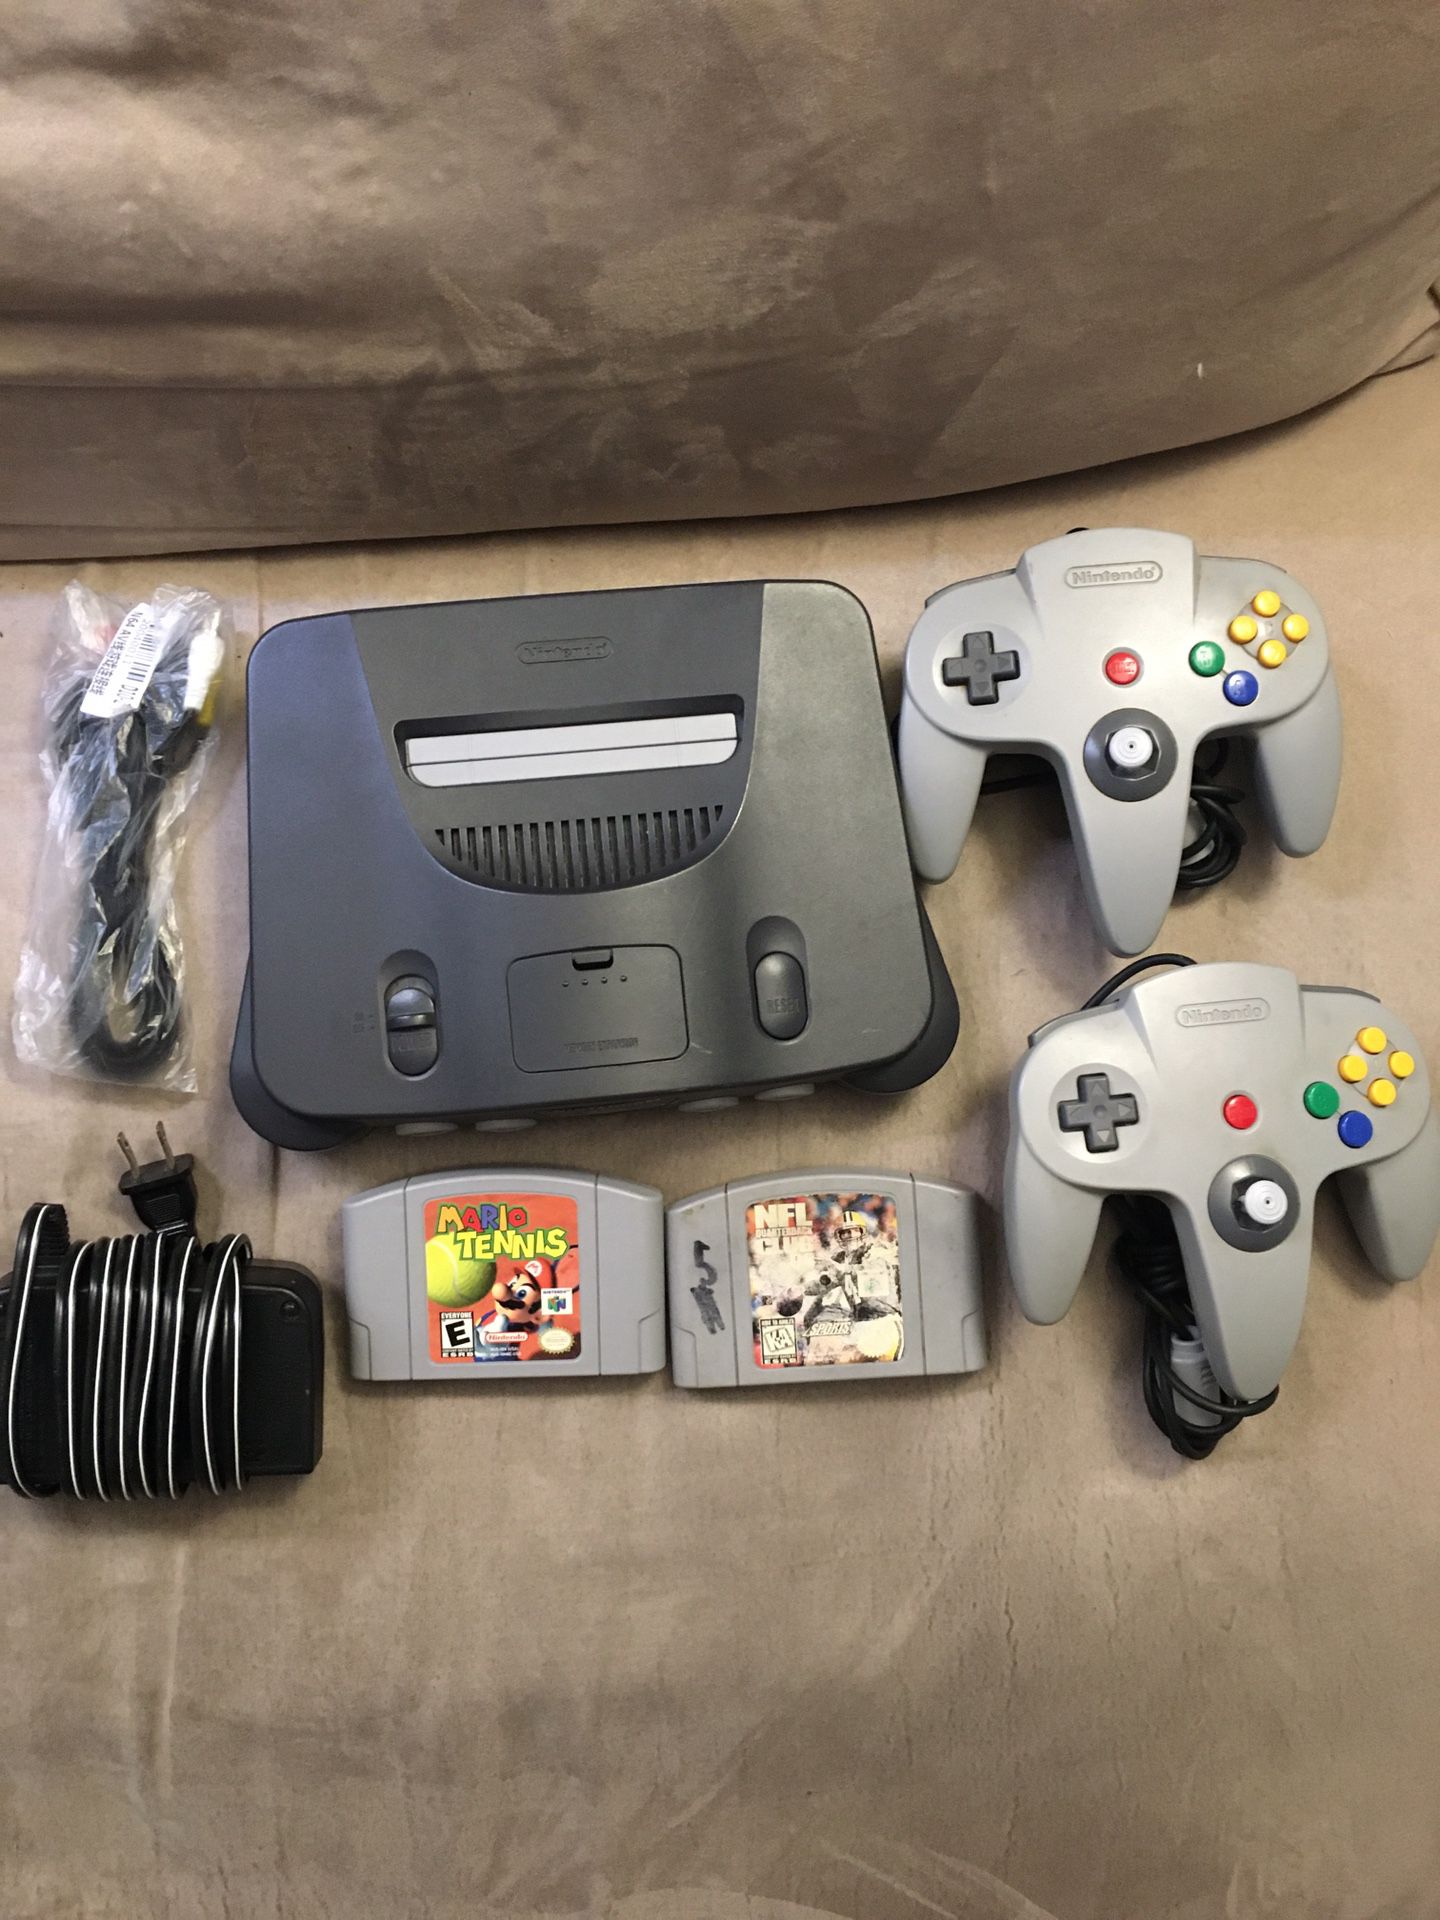 N64 Bundle Two OEM Controllers + Mario Kart Tennis And NFL Quarterback Club 99 OEM Power Cable Brand New 3rd Party AV Cable